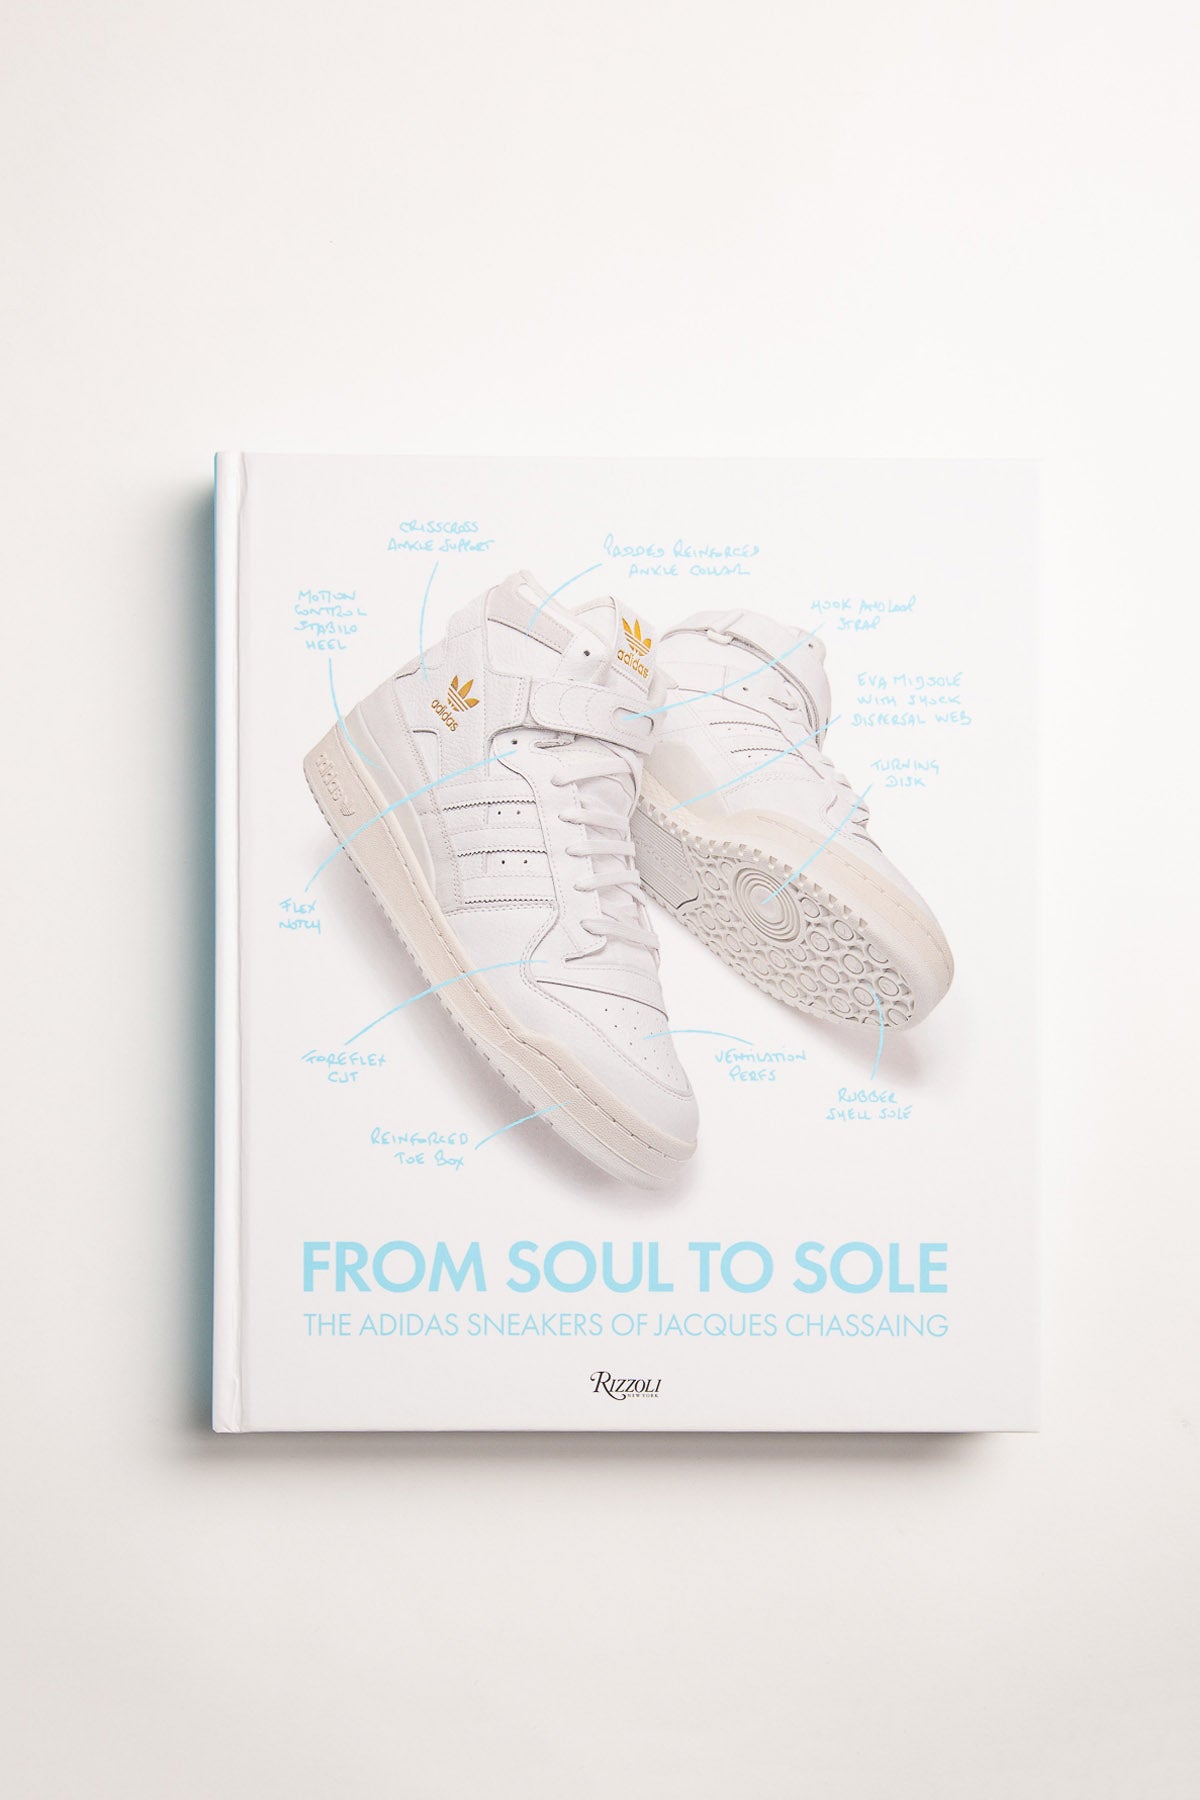 RIZZOLI | FROM SOUL TO SOLE: THE ADIDAS SNEAKERS OF JACQUES CHASSAING